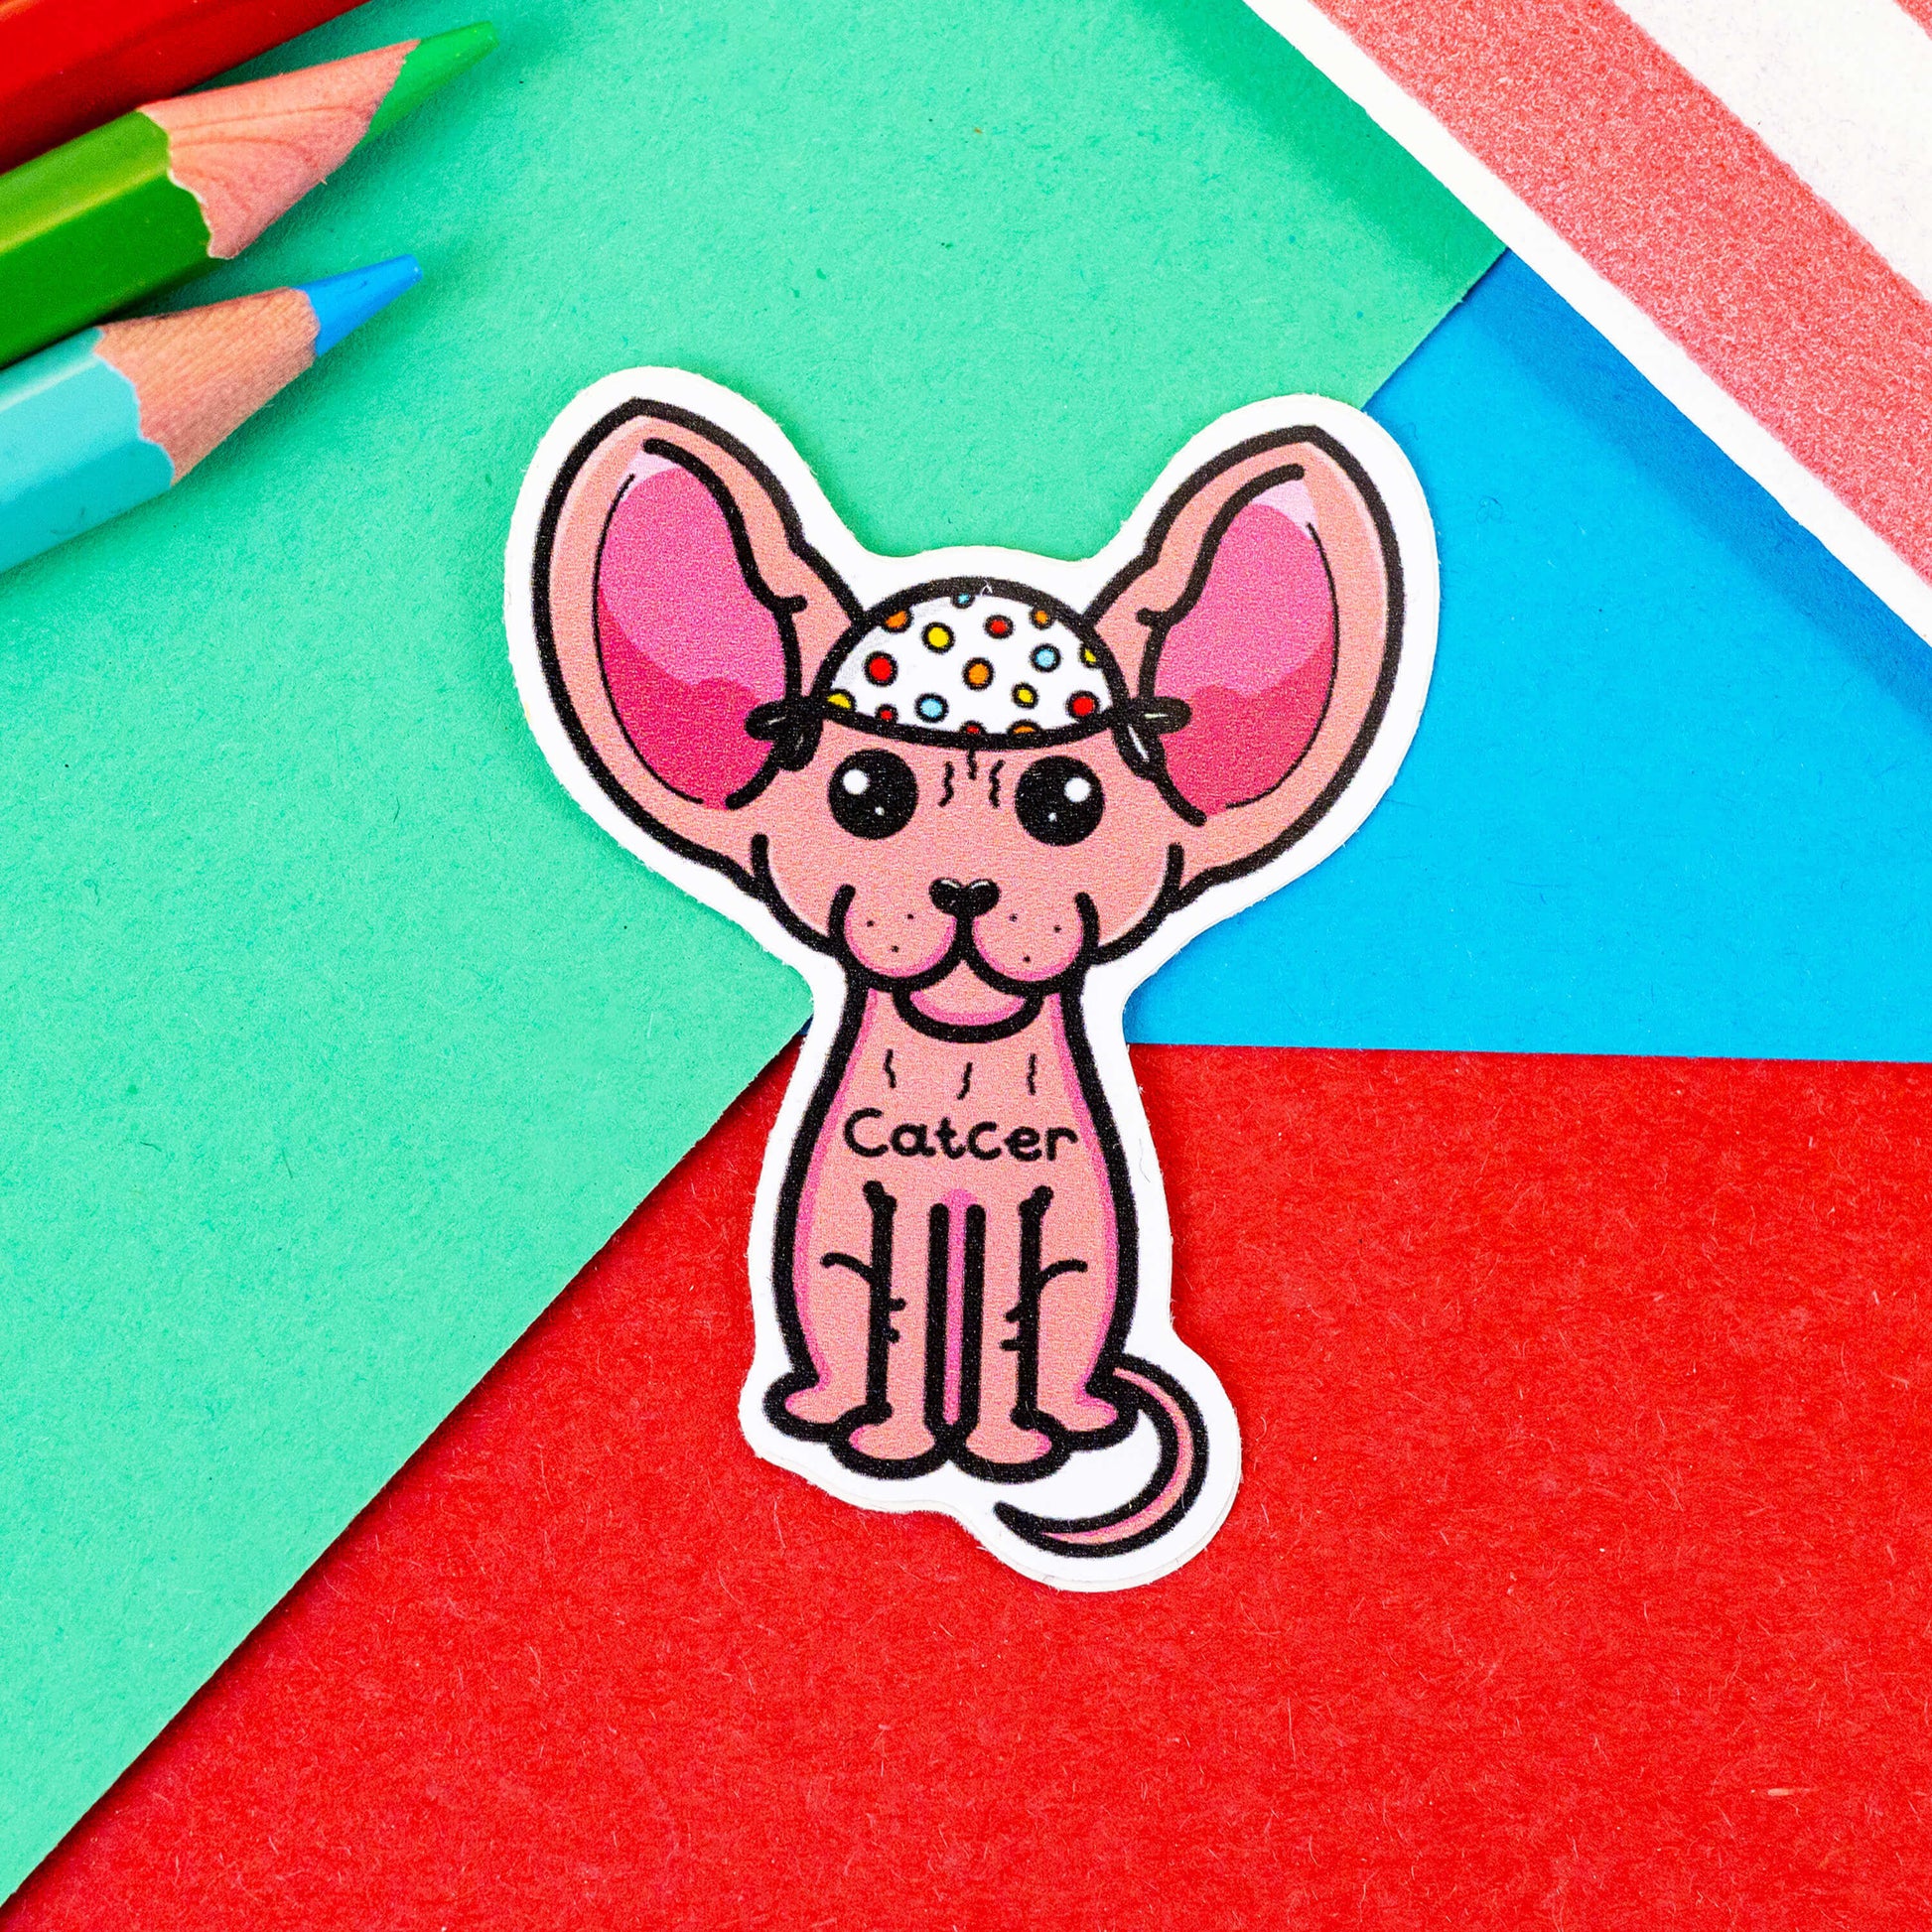 The Catcer Cat Sticker - Cancer on a red, green and blue background with colouring pencils and a red stripe candy bag. The sticker is a pink hairless sphynx cat wearing a white medical cap with rainbow polka dots, across its chest reads 'Catcer'. Designed to raise awareness for cancer.